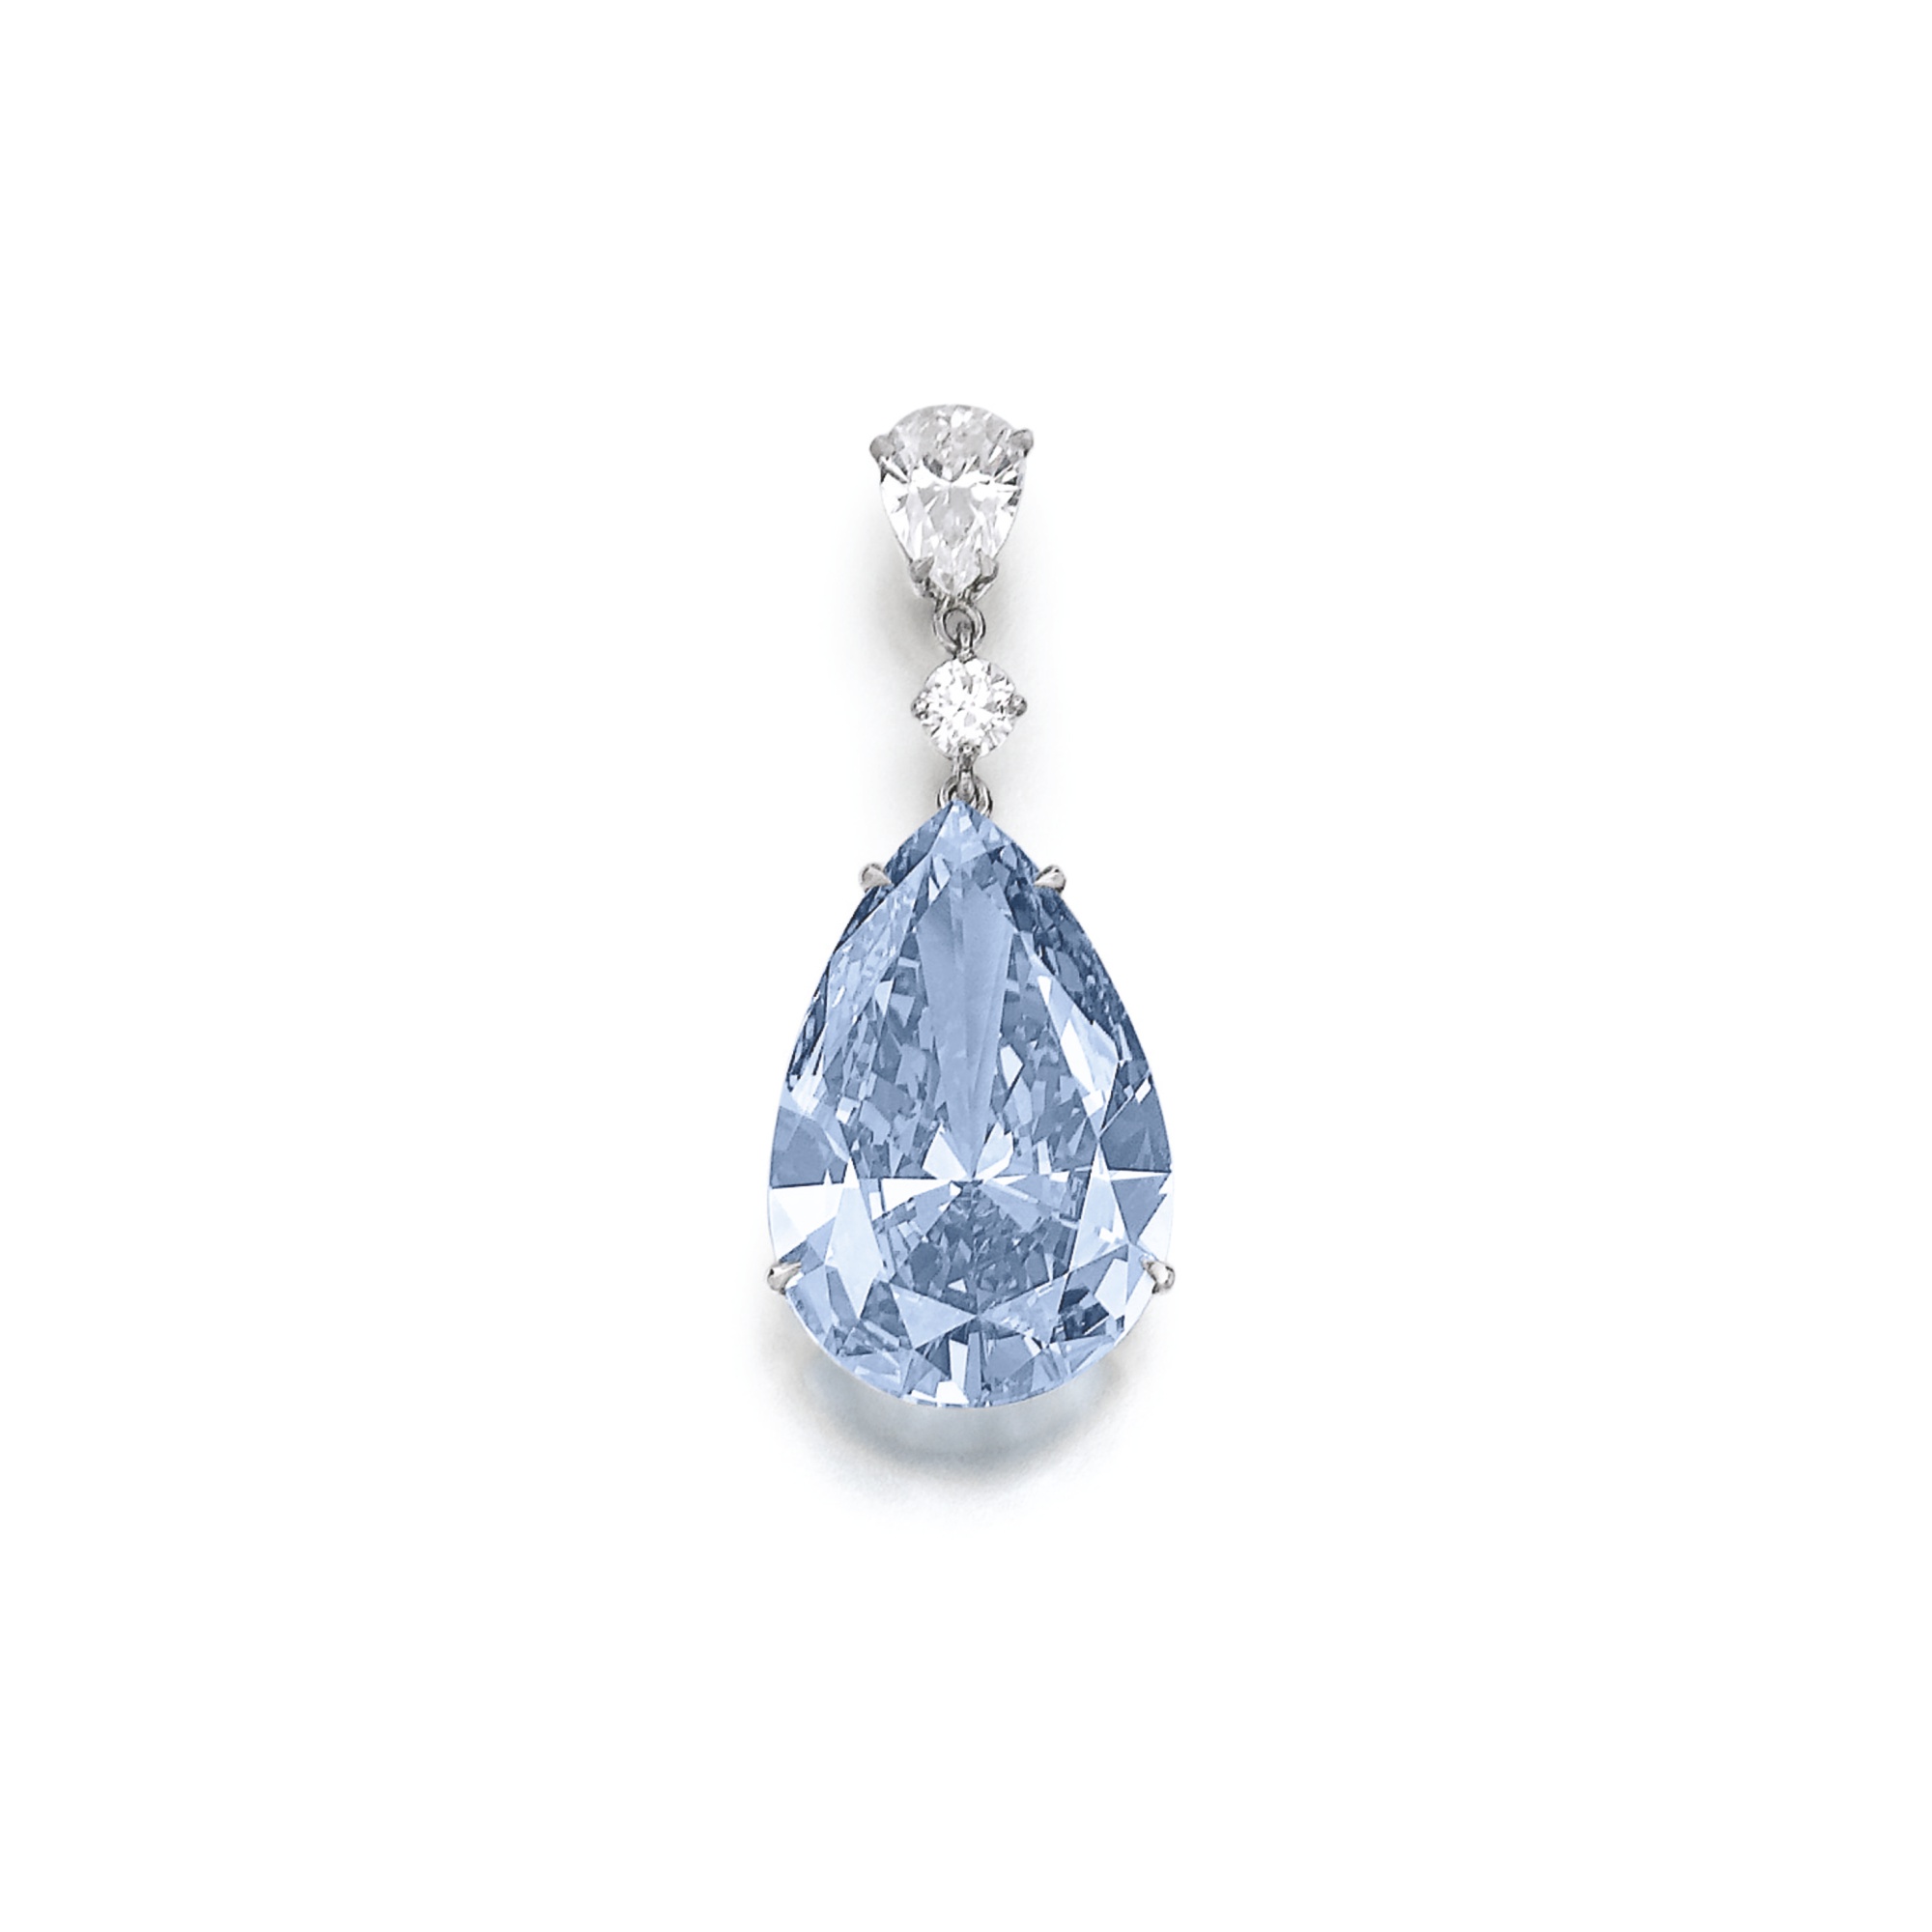  Superb and extremely rare fancy vivid blue diamond.&nbsp; The pear-shaped fancy vivid blue diamond of truly and outstanding color and purity weighing 14.54 carats, mounted as an earring with a pear-shaped and a brilliant-cut diamond, post fitting. A